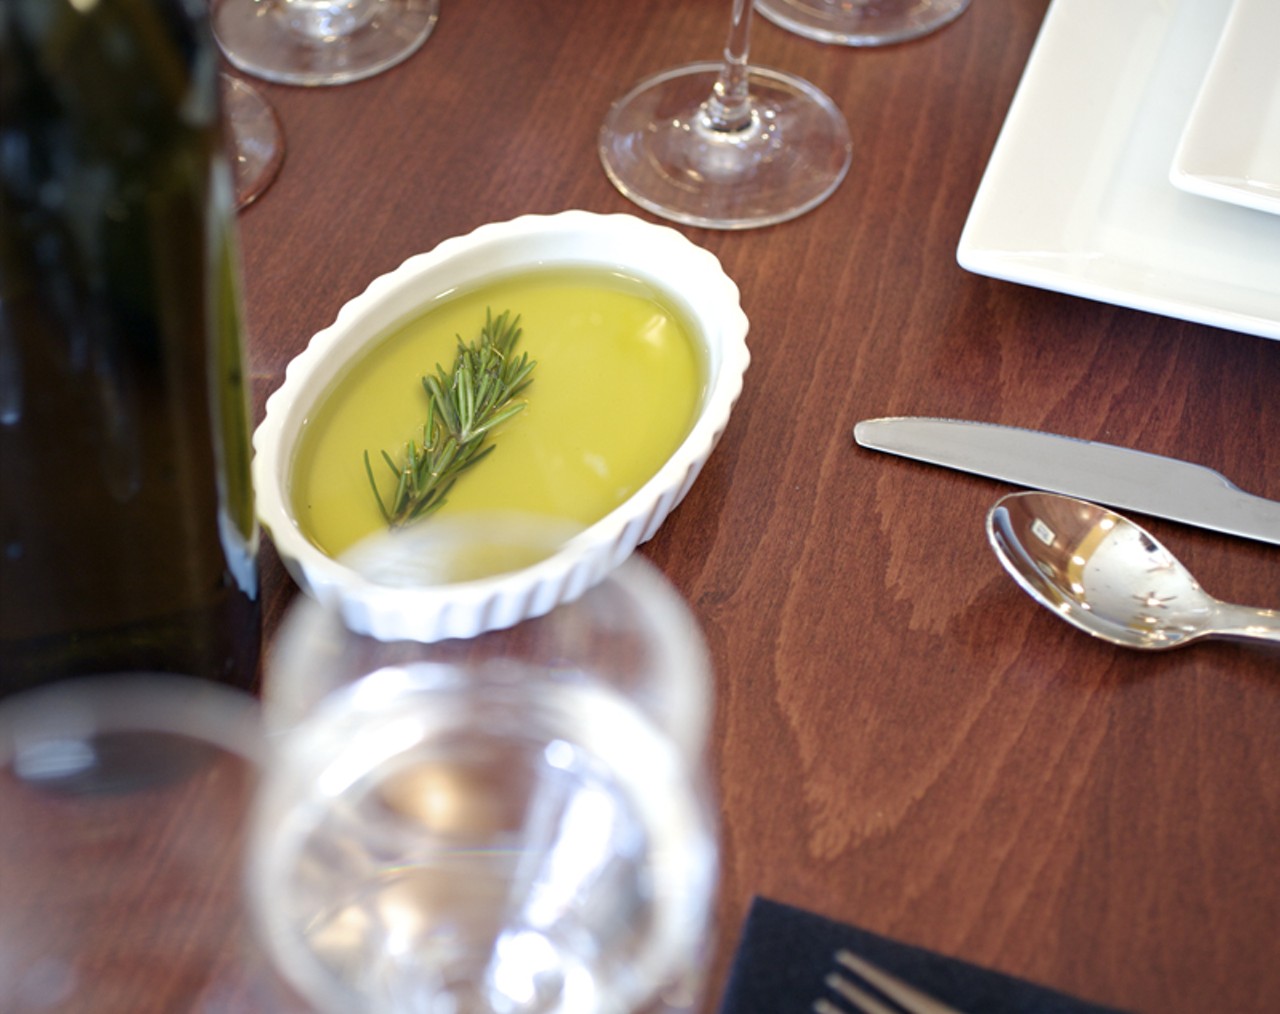 For the supper club table, olive oil with rosemary was available for dipping one&rsquo;s bread.